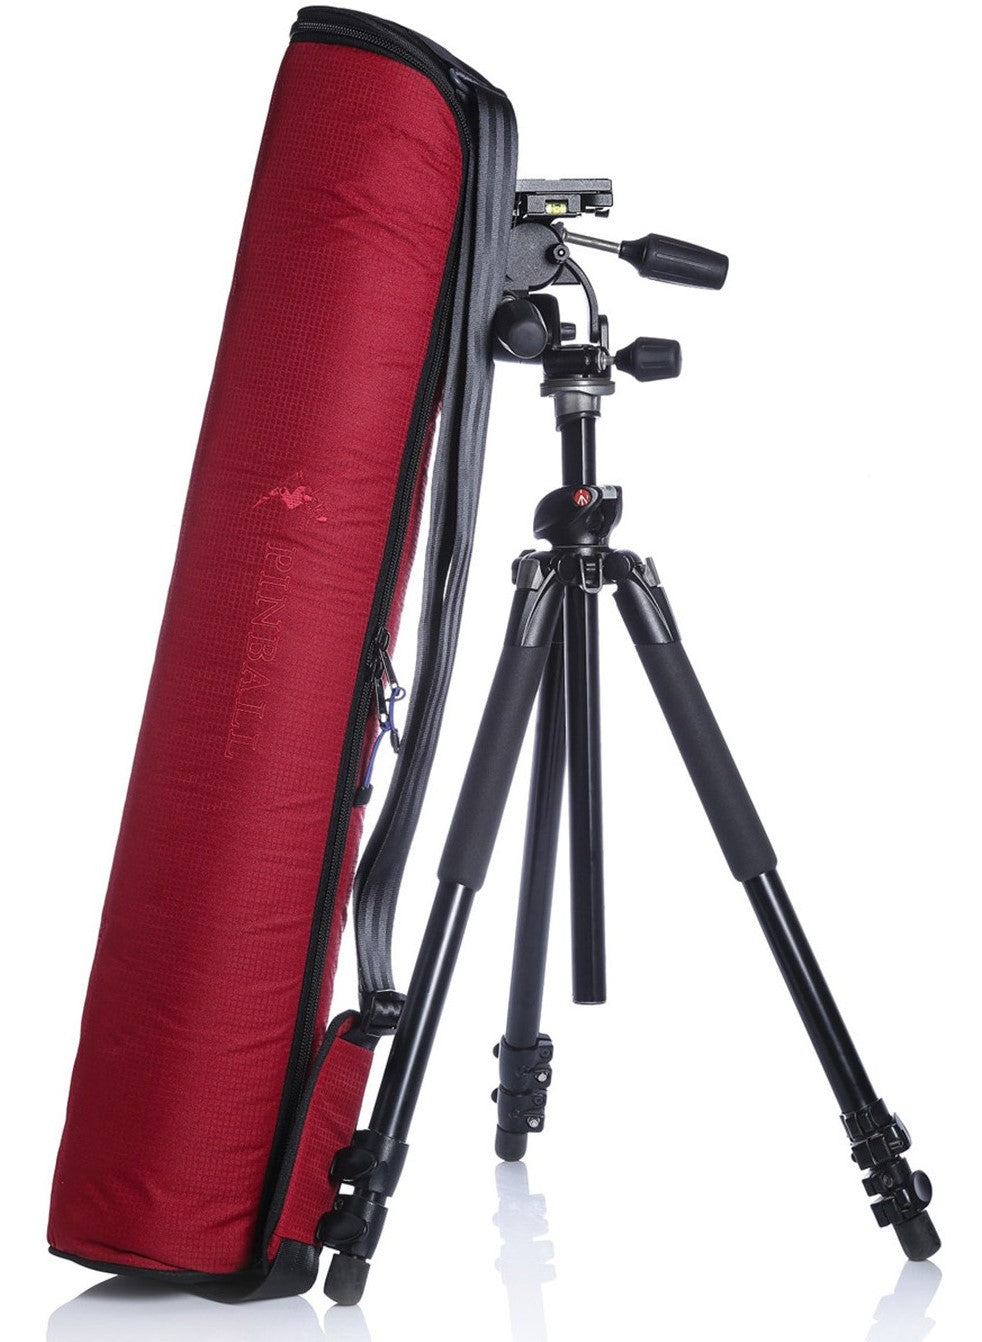 The Mario-2 sling bag from the game series, featuring a stylish design, rests gracefully on a tripod, symbolizing its purpose as a specialized trip bag. The bag's functionality and ergonomics make it the perfect companion for photographers and videographers who value convenience and protection for their tripod stands.